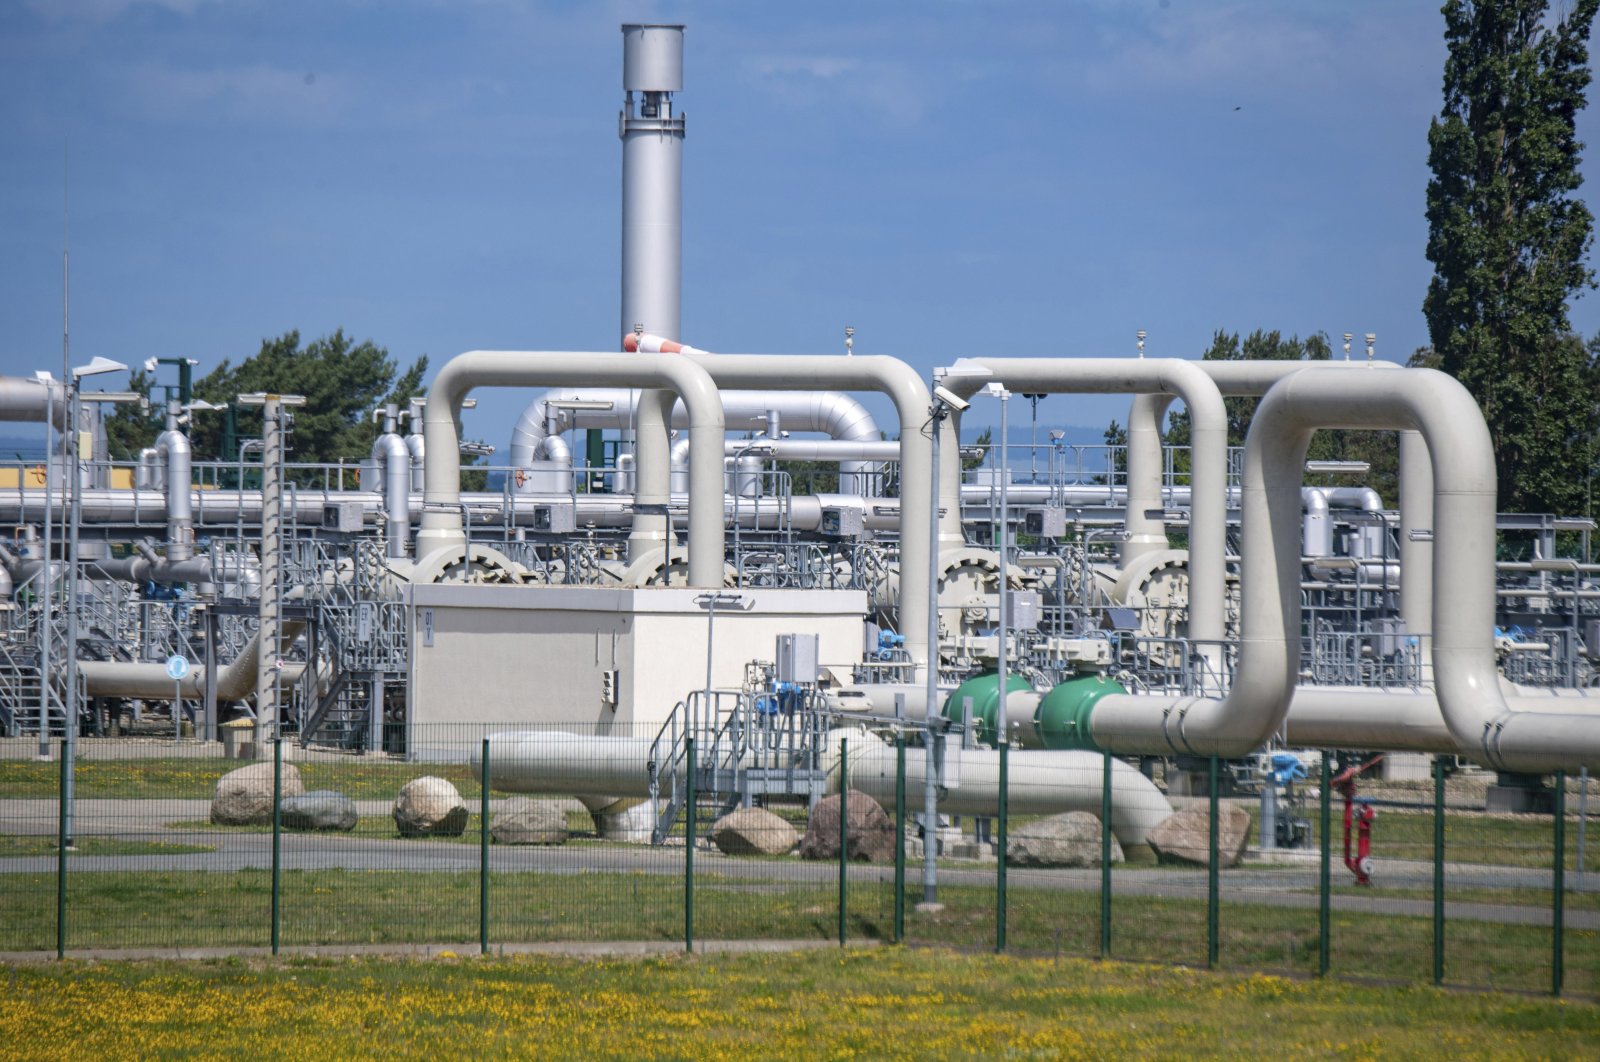 A view of pipe systems and shut-off devices at the gas receiving station of the Nord Stream 1 Baltic Sea pipeline and the transfer station of the OPAL (Ostsee-Pipeline-Anbindungsleitung - Baltic Sea Pipeline Link) long-distance gas pipeline in Lubmin, Germany, June 21, 2022. (AP File Photo)